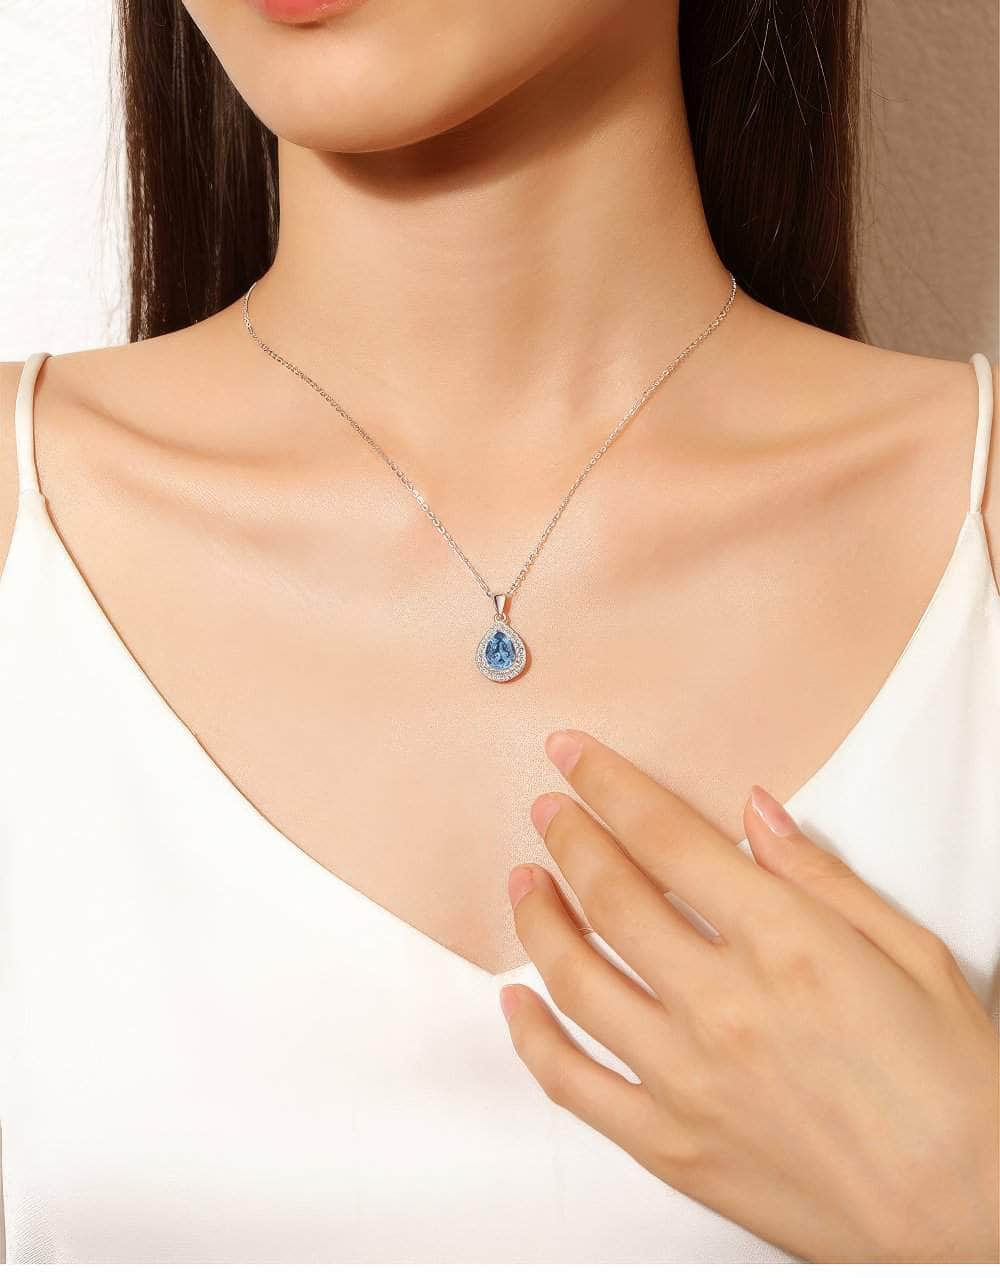 S925 Sterling Silver Paved Crystal Pear-Shaped Pendant Lab Diamond Necklace